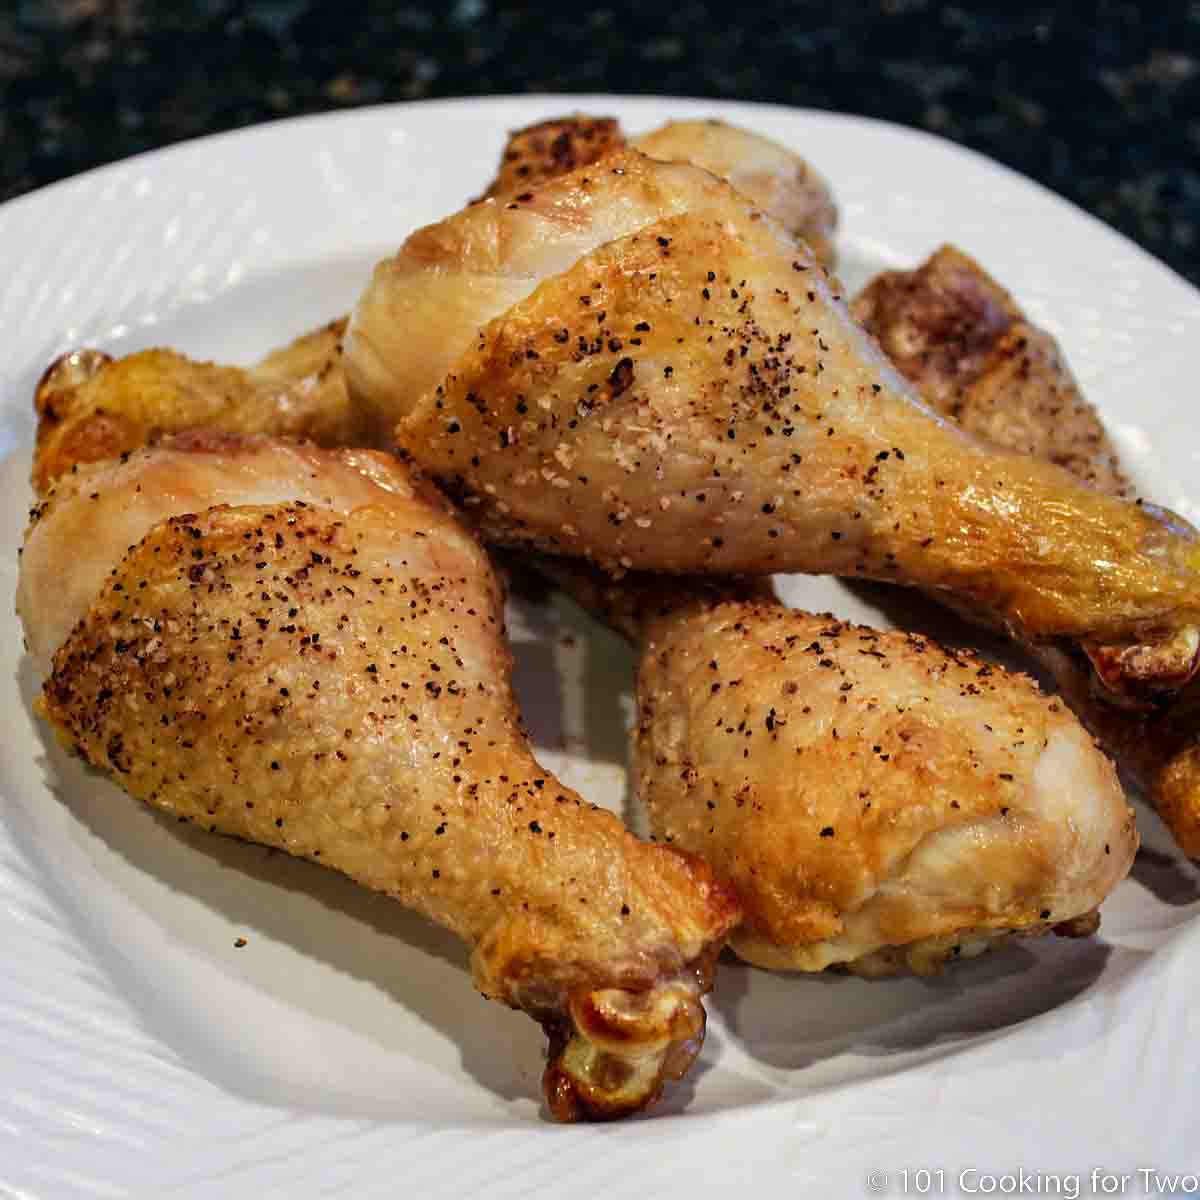 A pile of chicken legs on a white plate